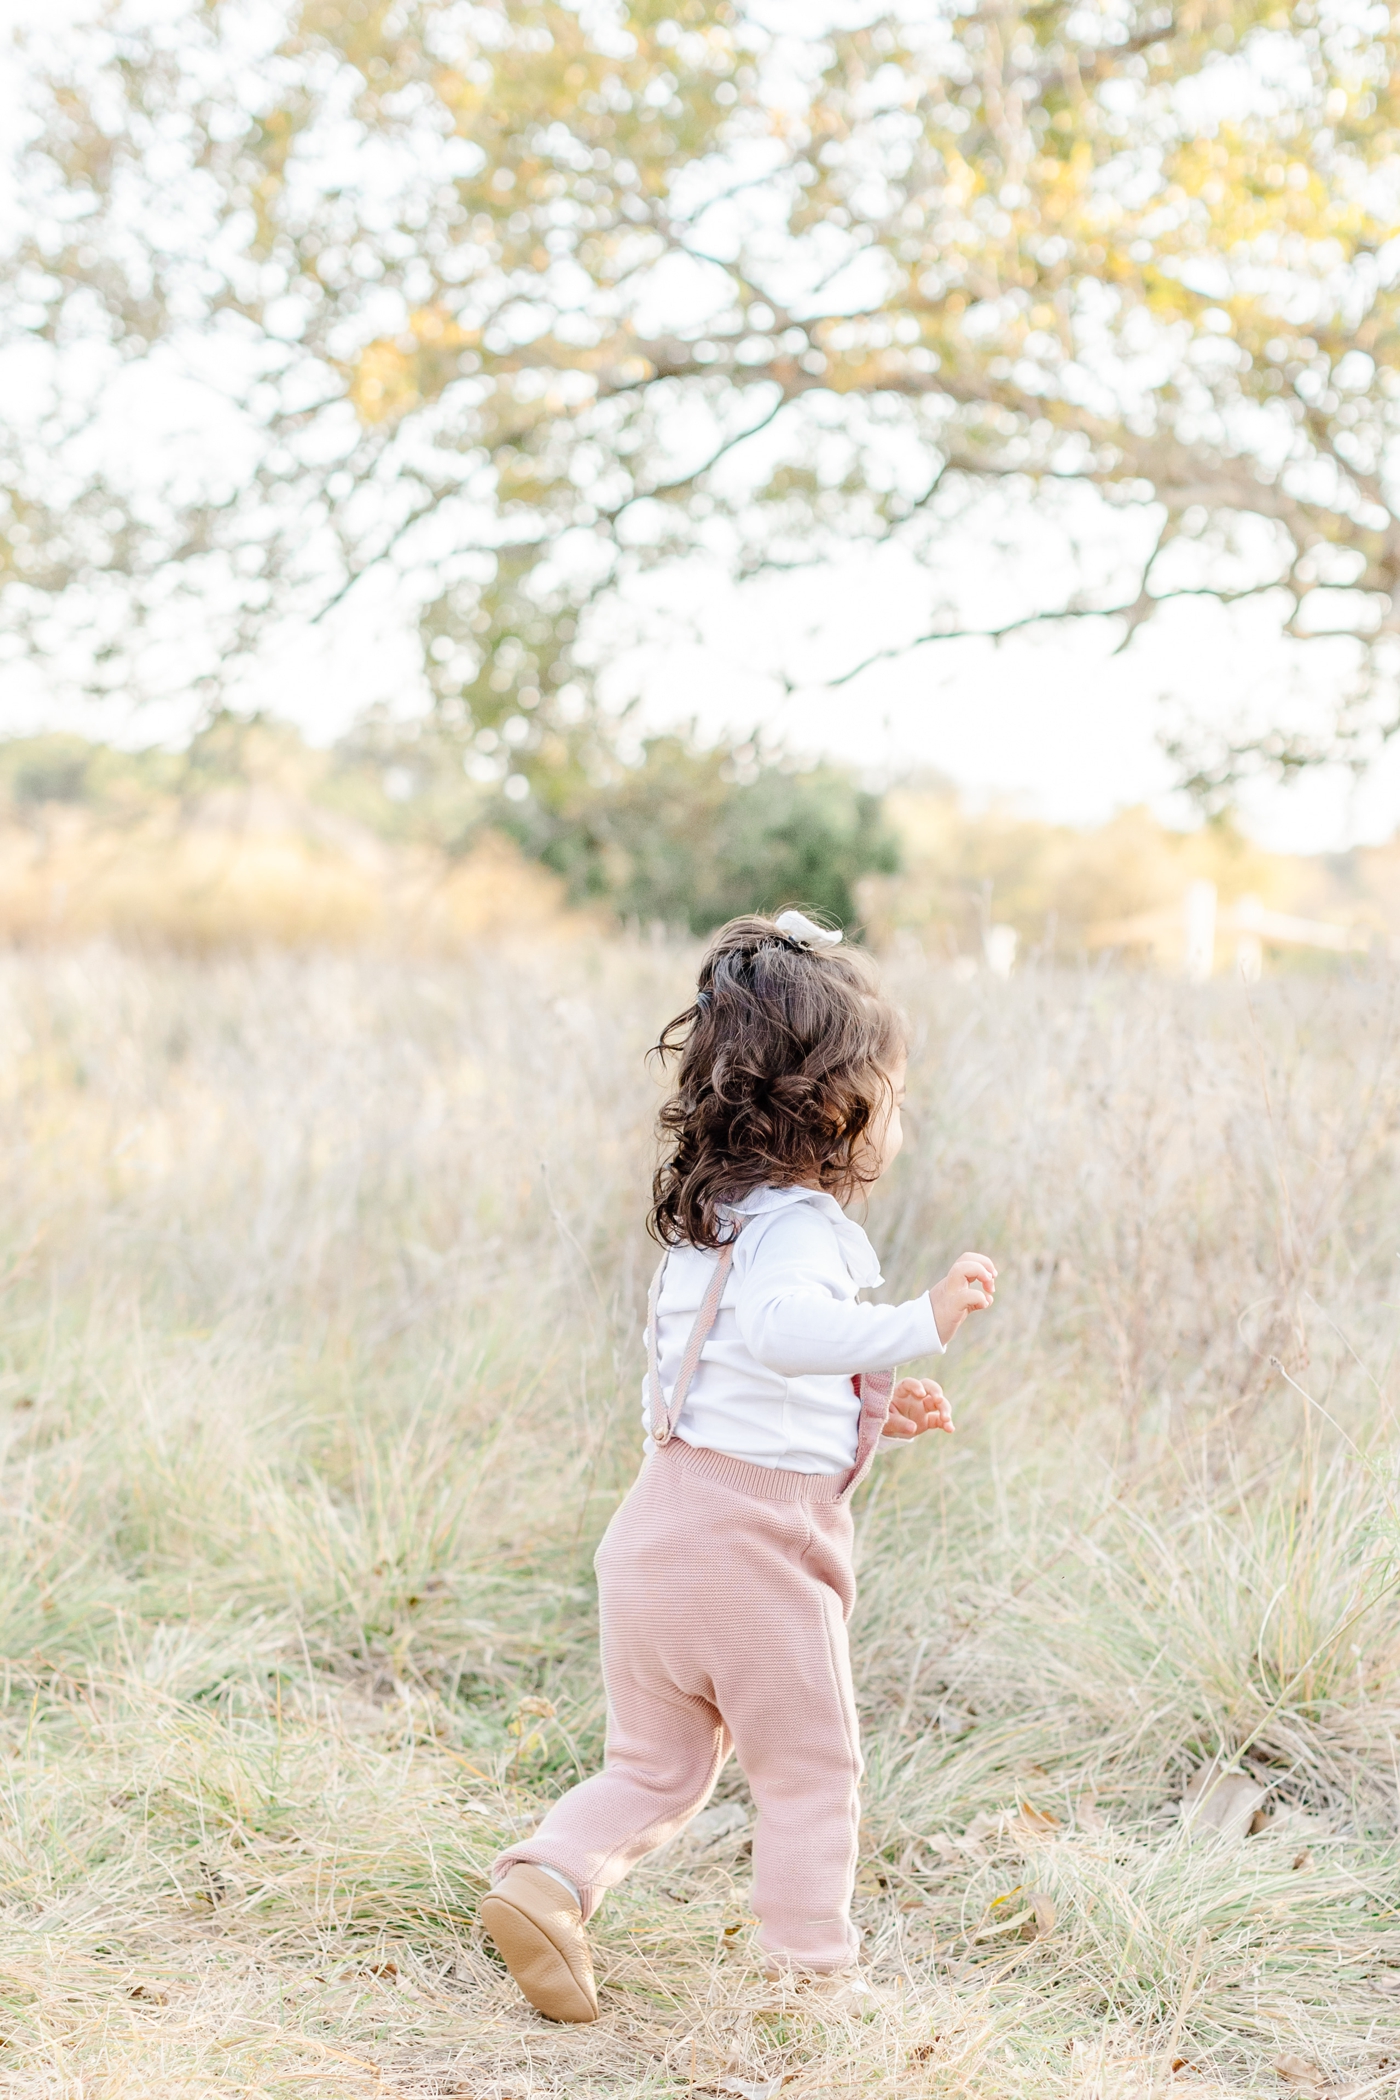 Toddler wearing pink knit jumpsuit playing in field with tall grass. Photo by Austin family photographer, Sana Ahmed Photography.